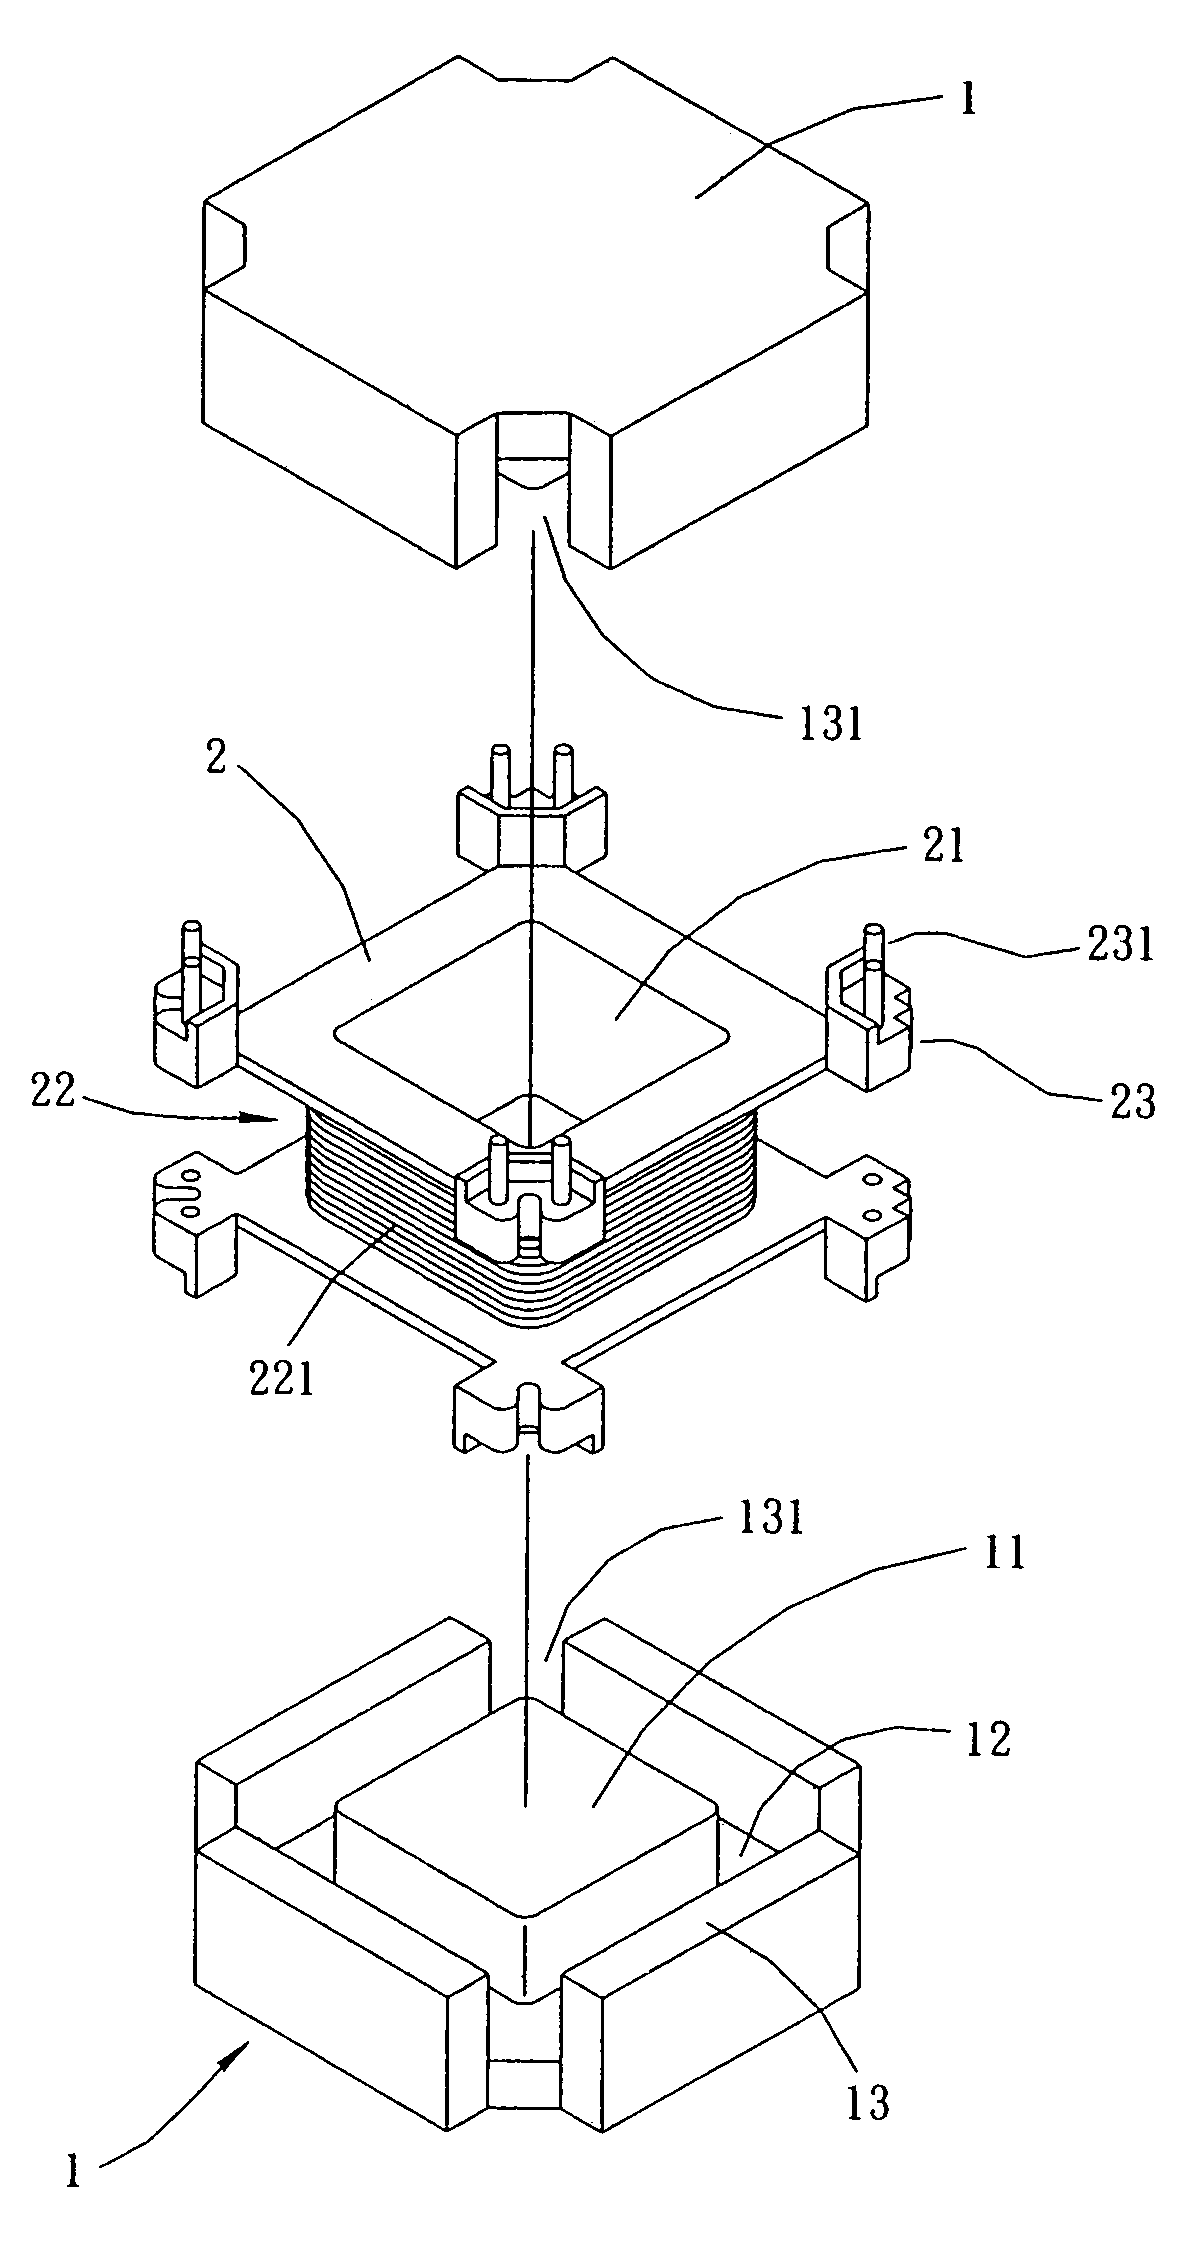 Structure of inductance core and wire frame